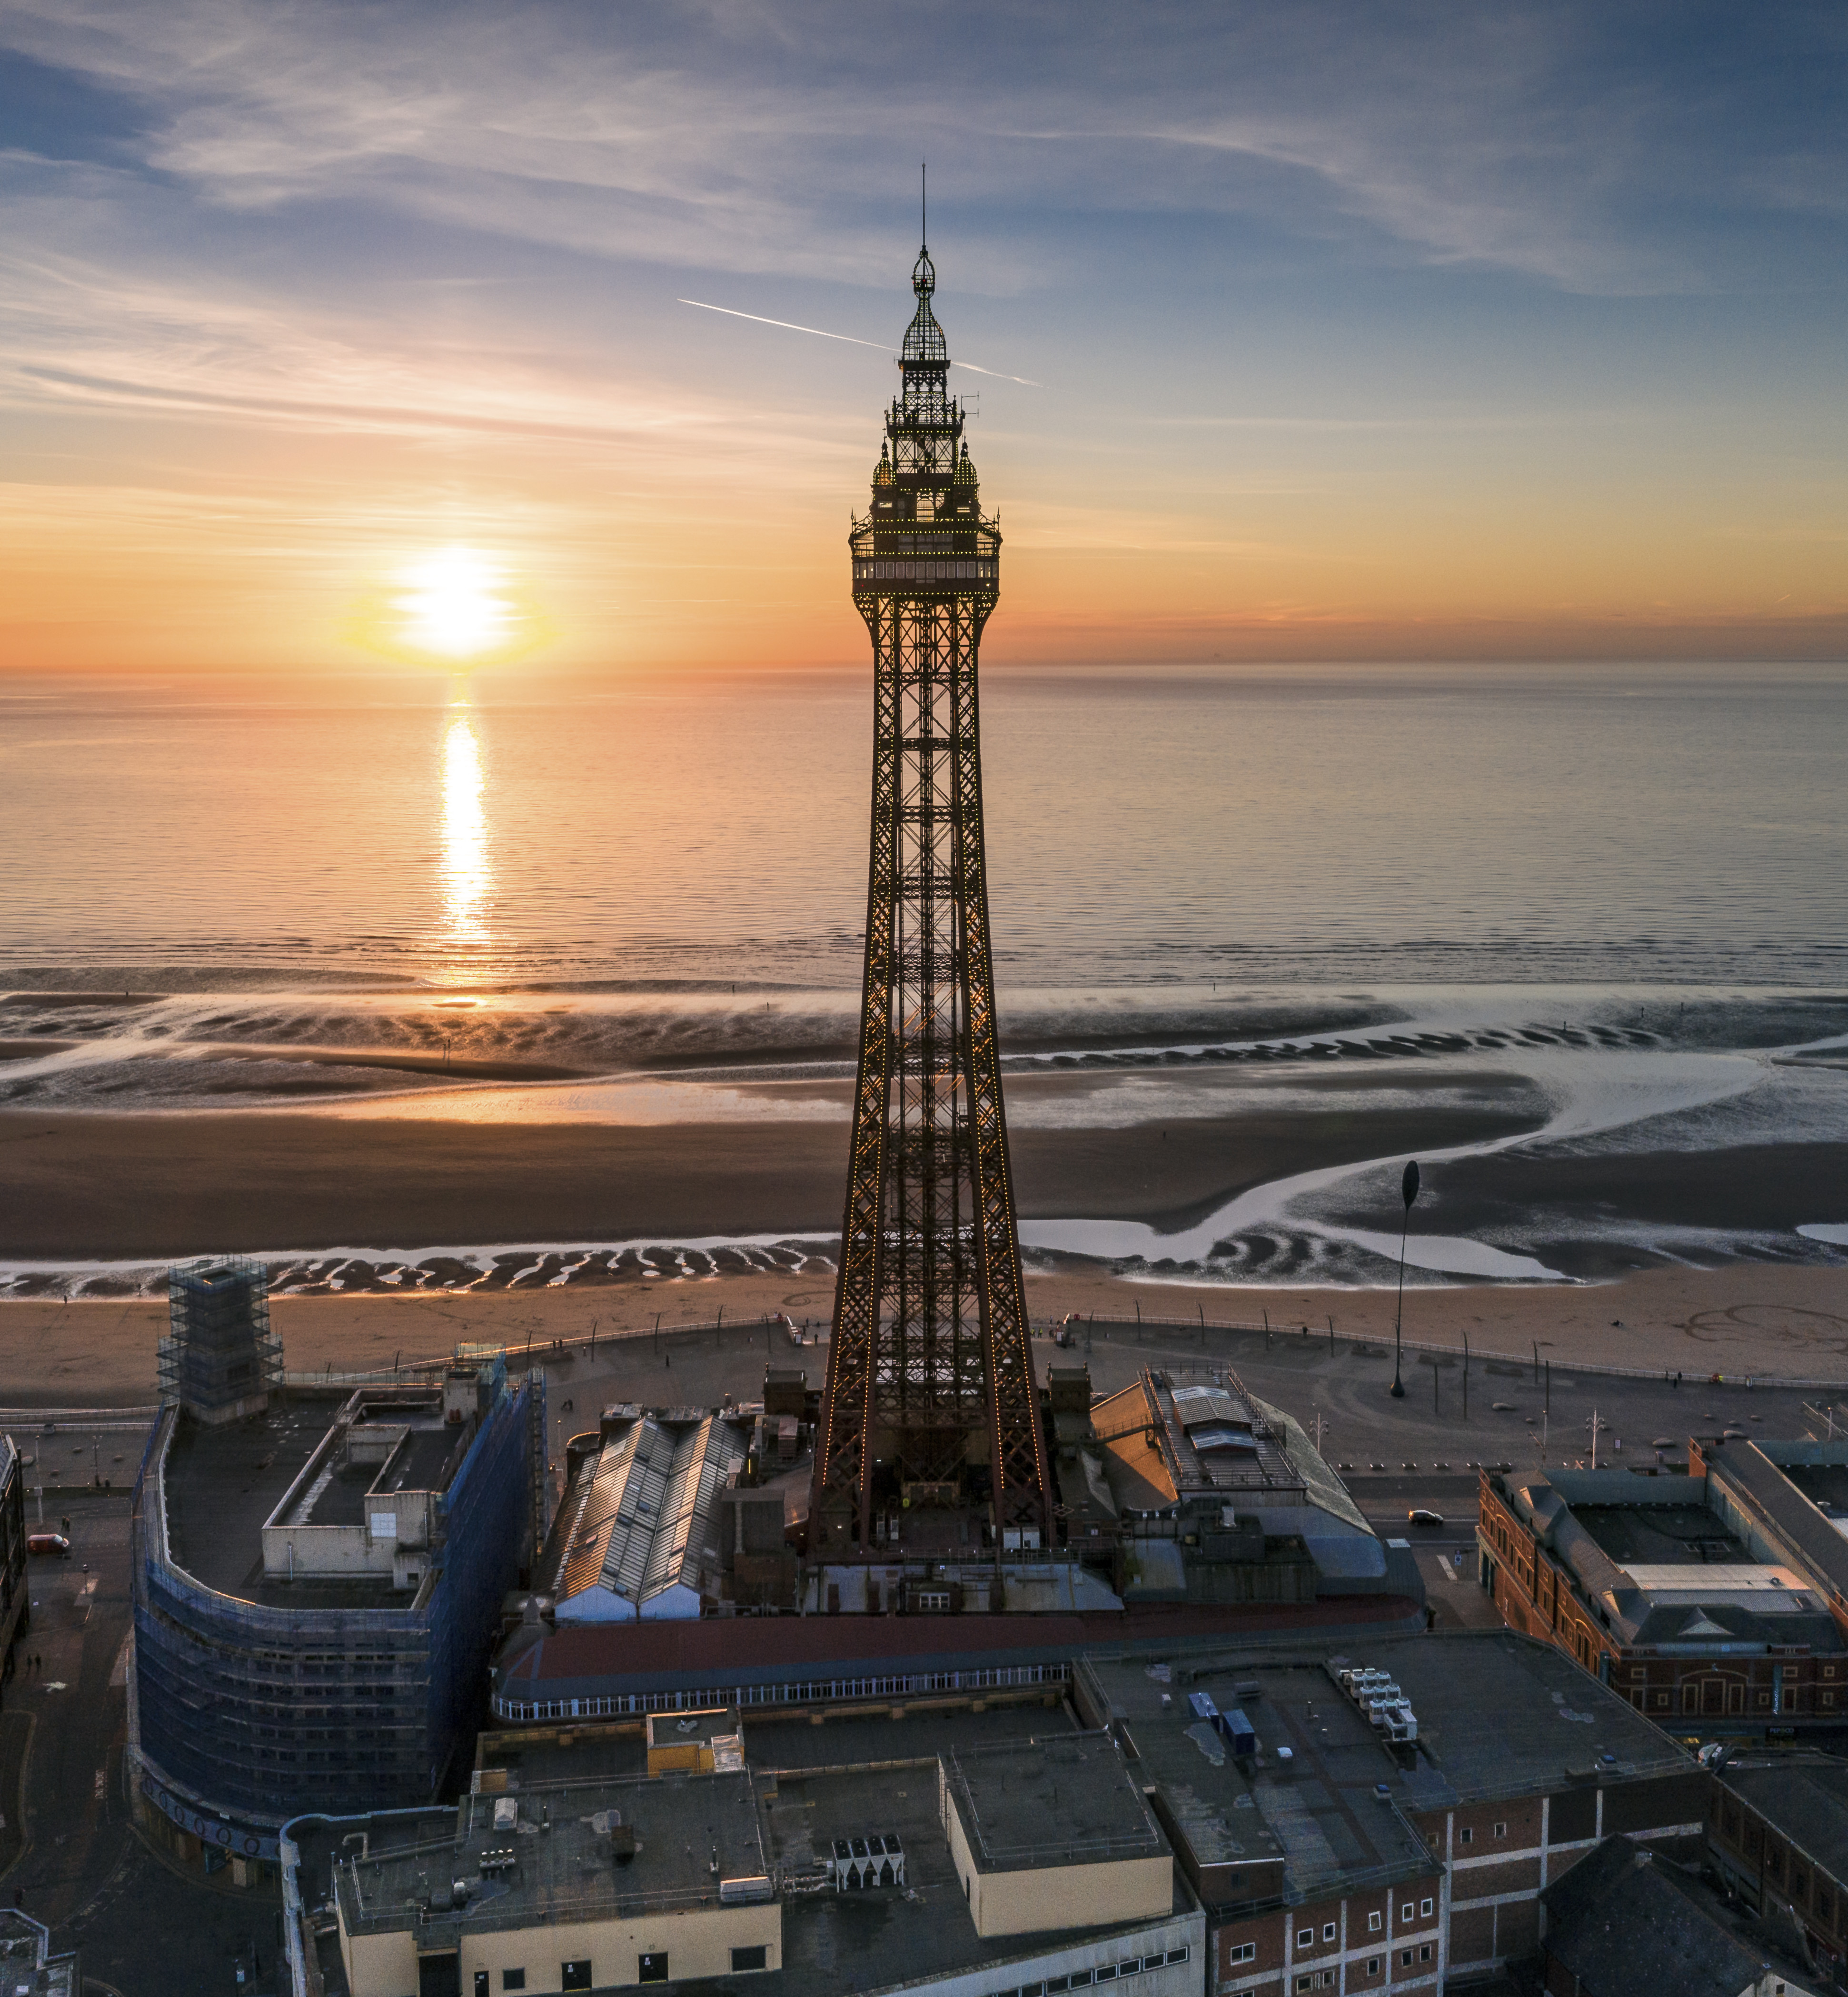 a bird's eye view of Blackpool Tower at sunset, with coast in front of the tower and the town behind it